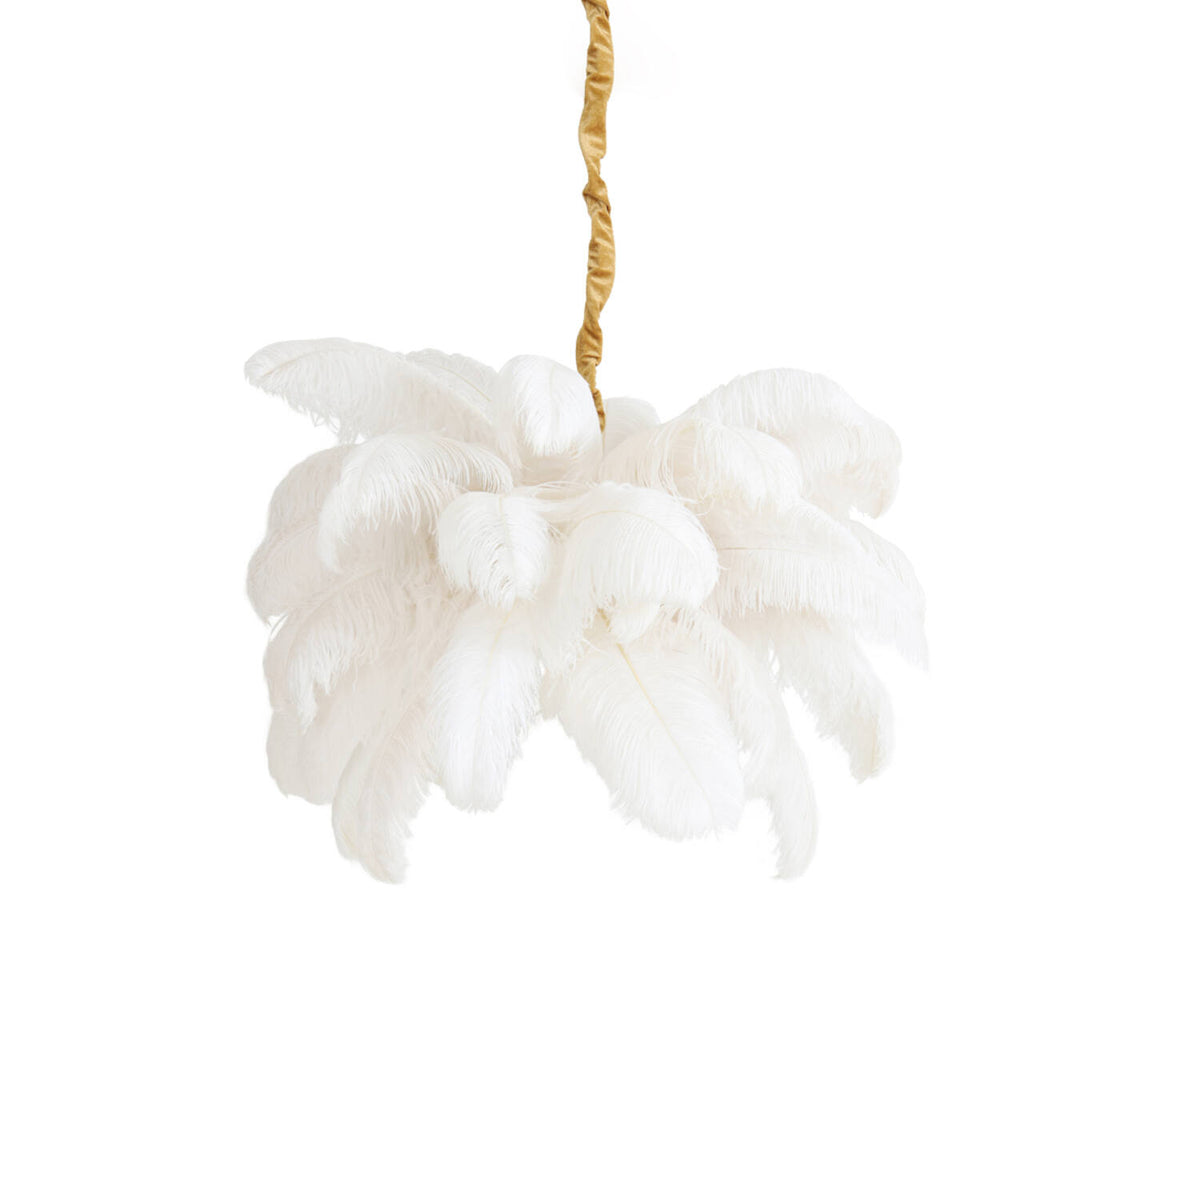 Hanging lamp E14 080 cm FEATHER gold+white